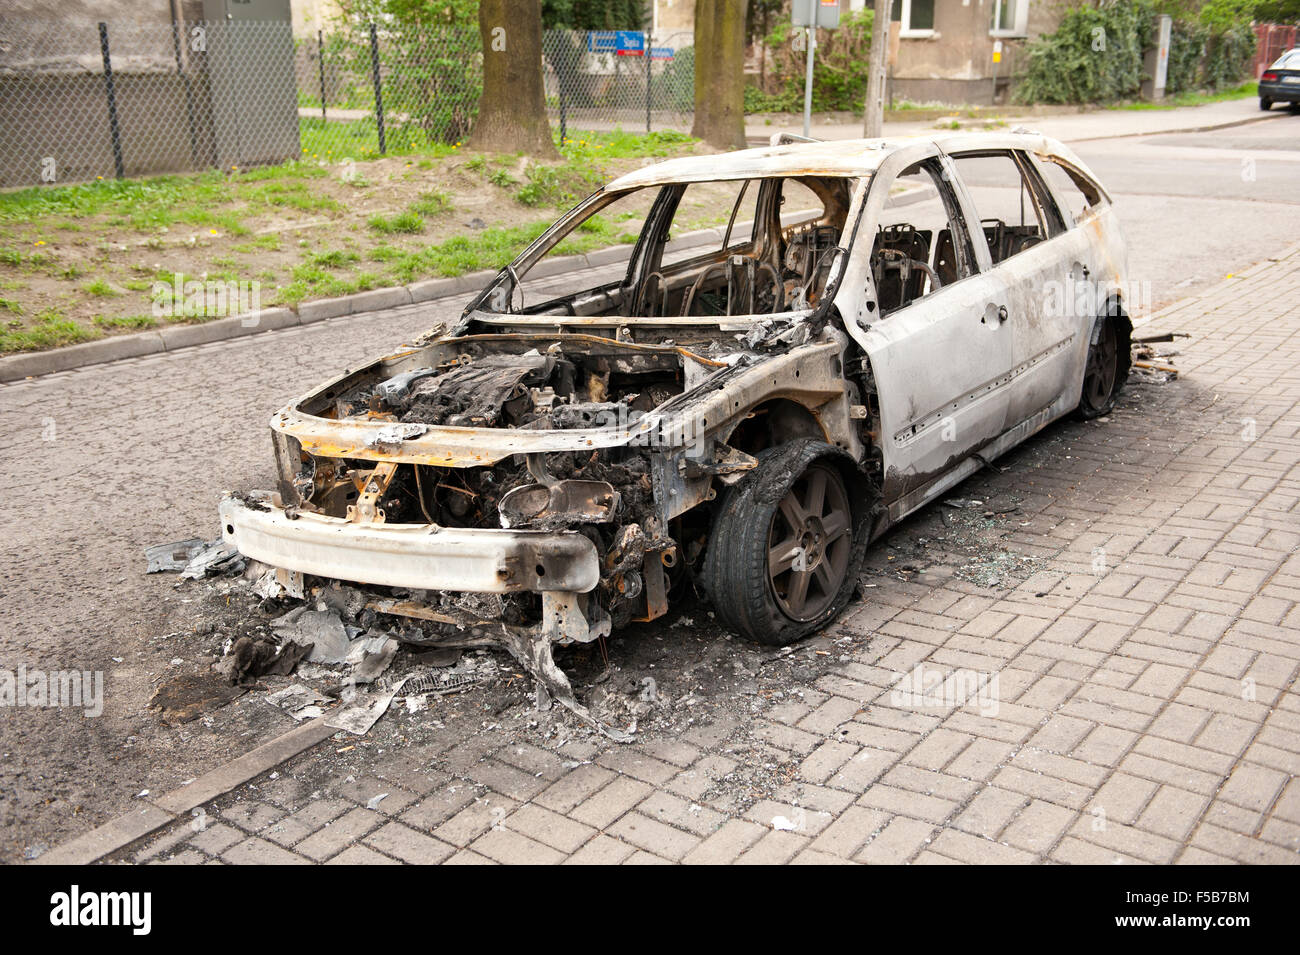 Burnt white car wreck at the pavement in Poland, spoilt car in fire accident, charred vehicle junk and ashes arson incident ... Stock Photo